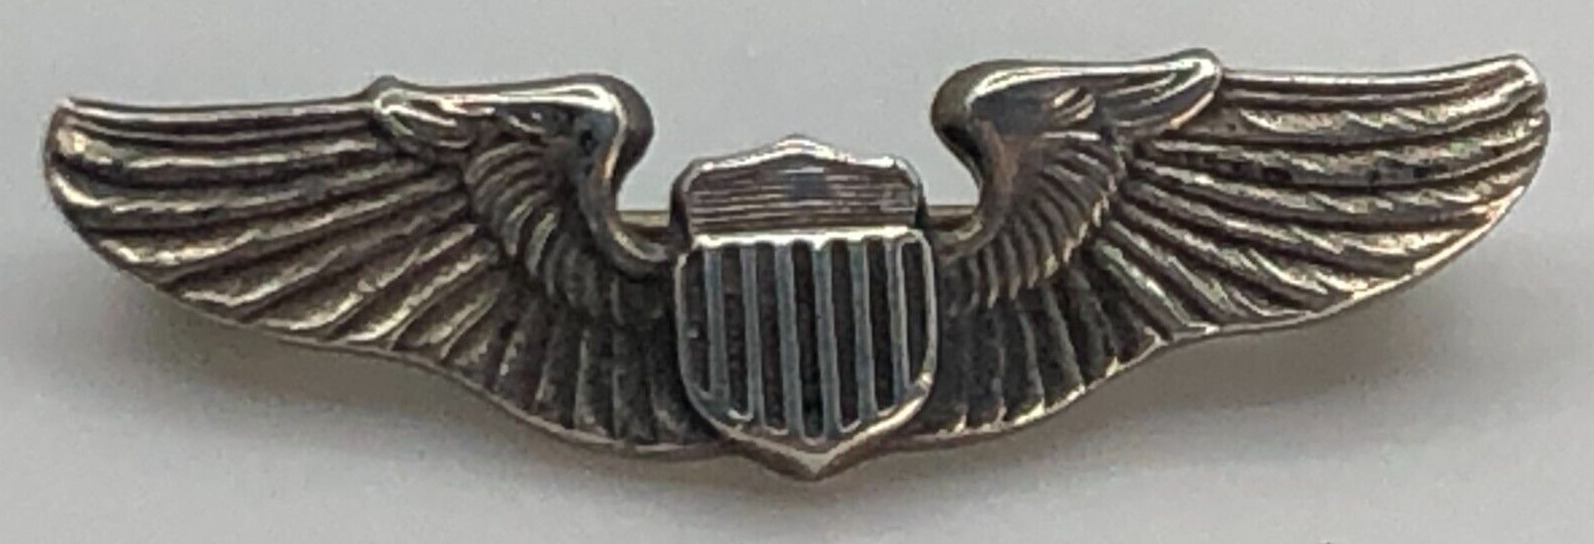 WWII Army Air Force Pilot Wings Sterling Silver Pin